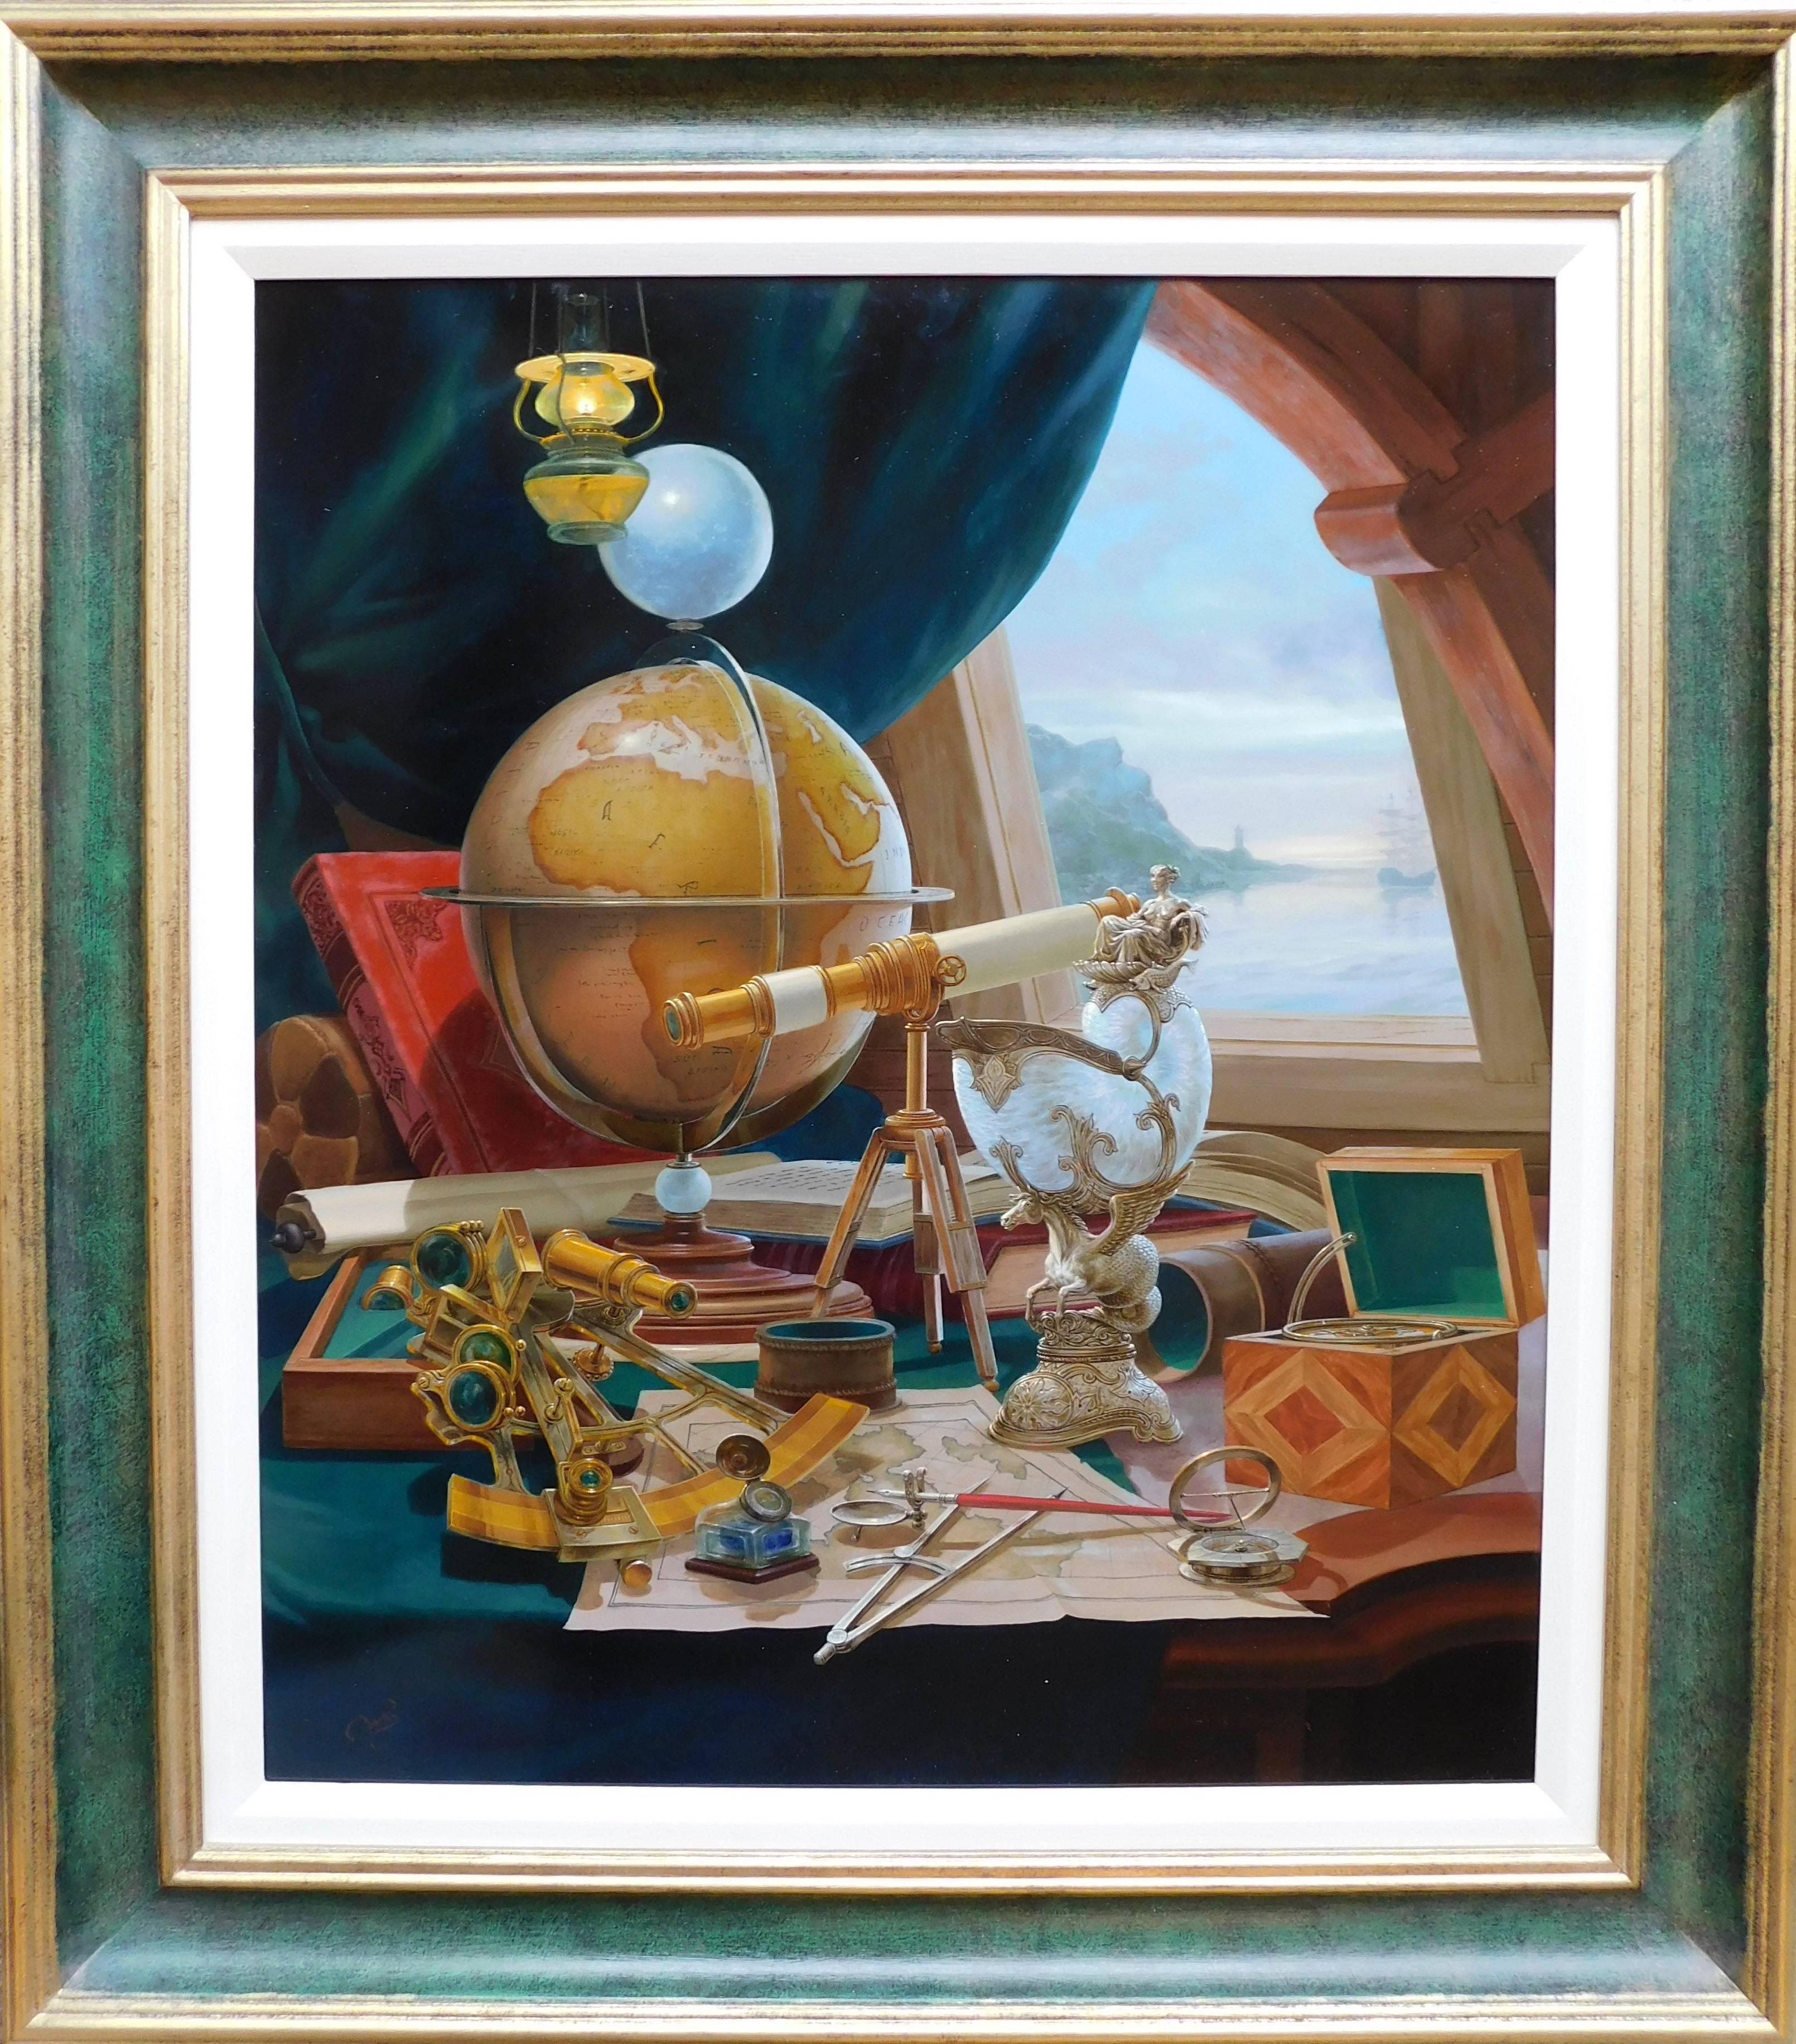 The Captains Journey - Painting by Gyula Boros